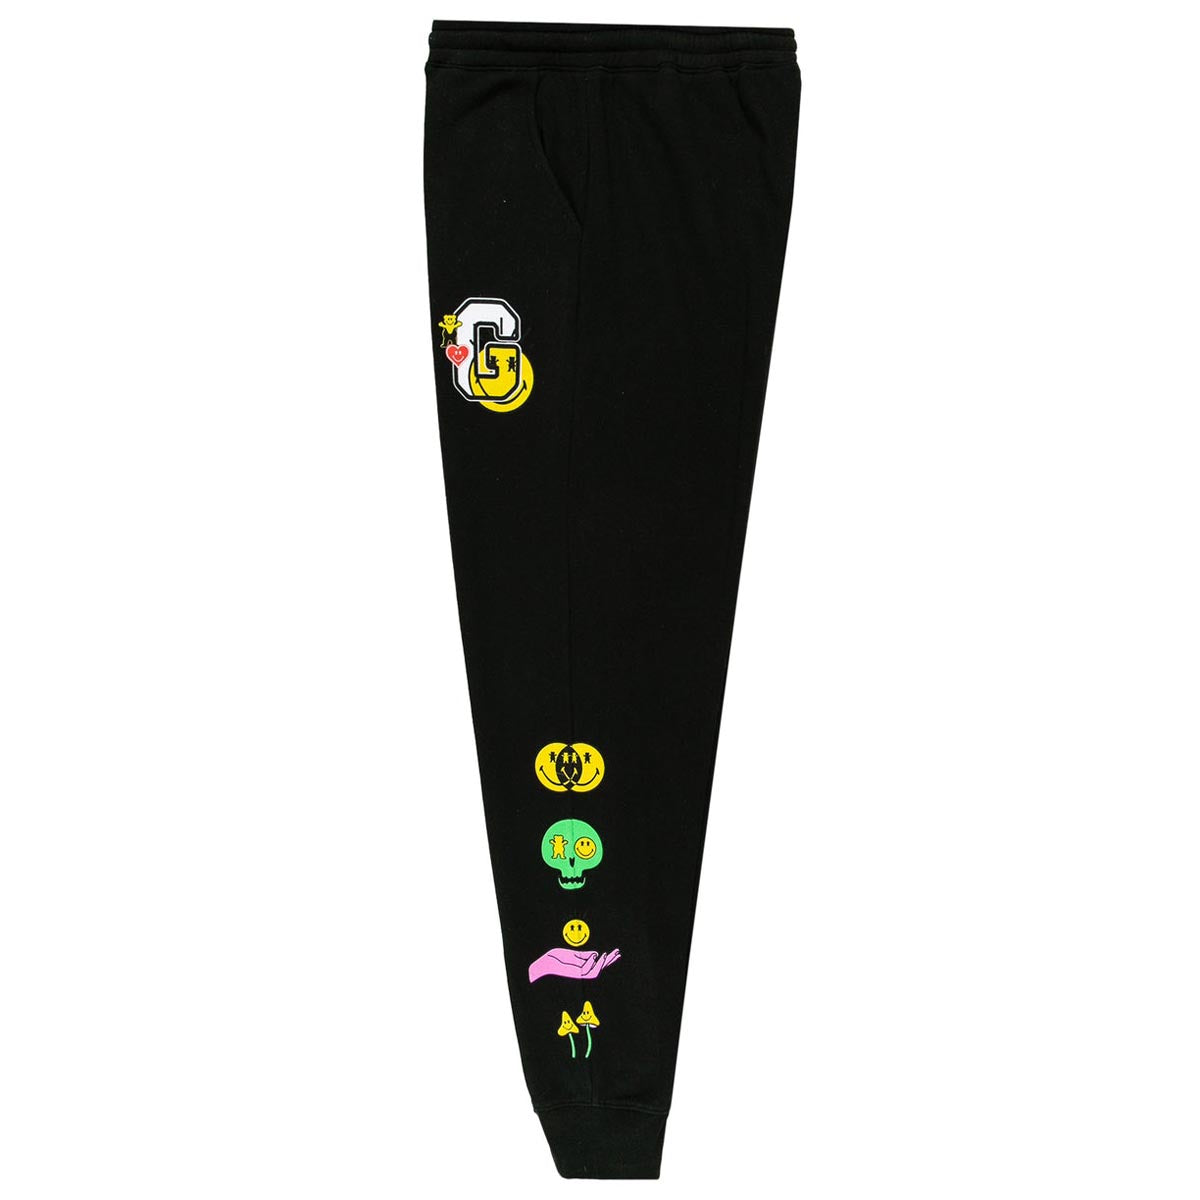 Grizzly x Smiley World Sweat Pants - Black image 2